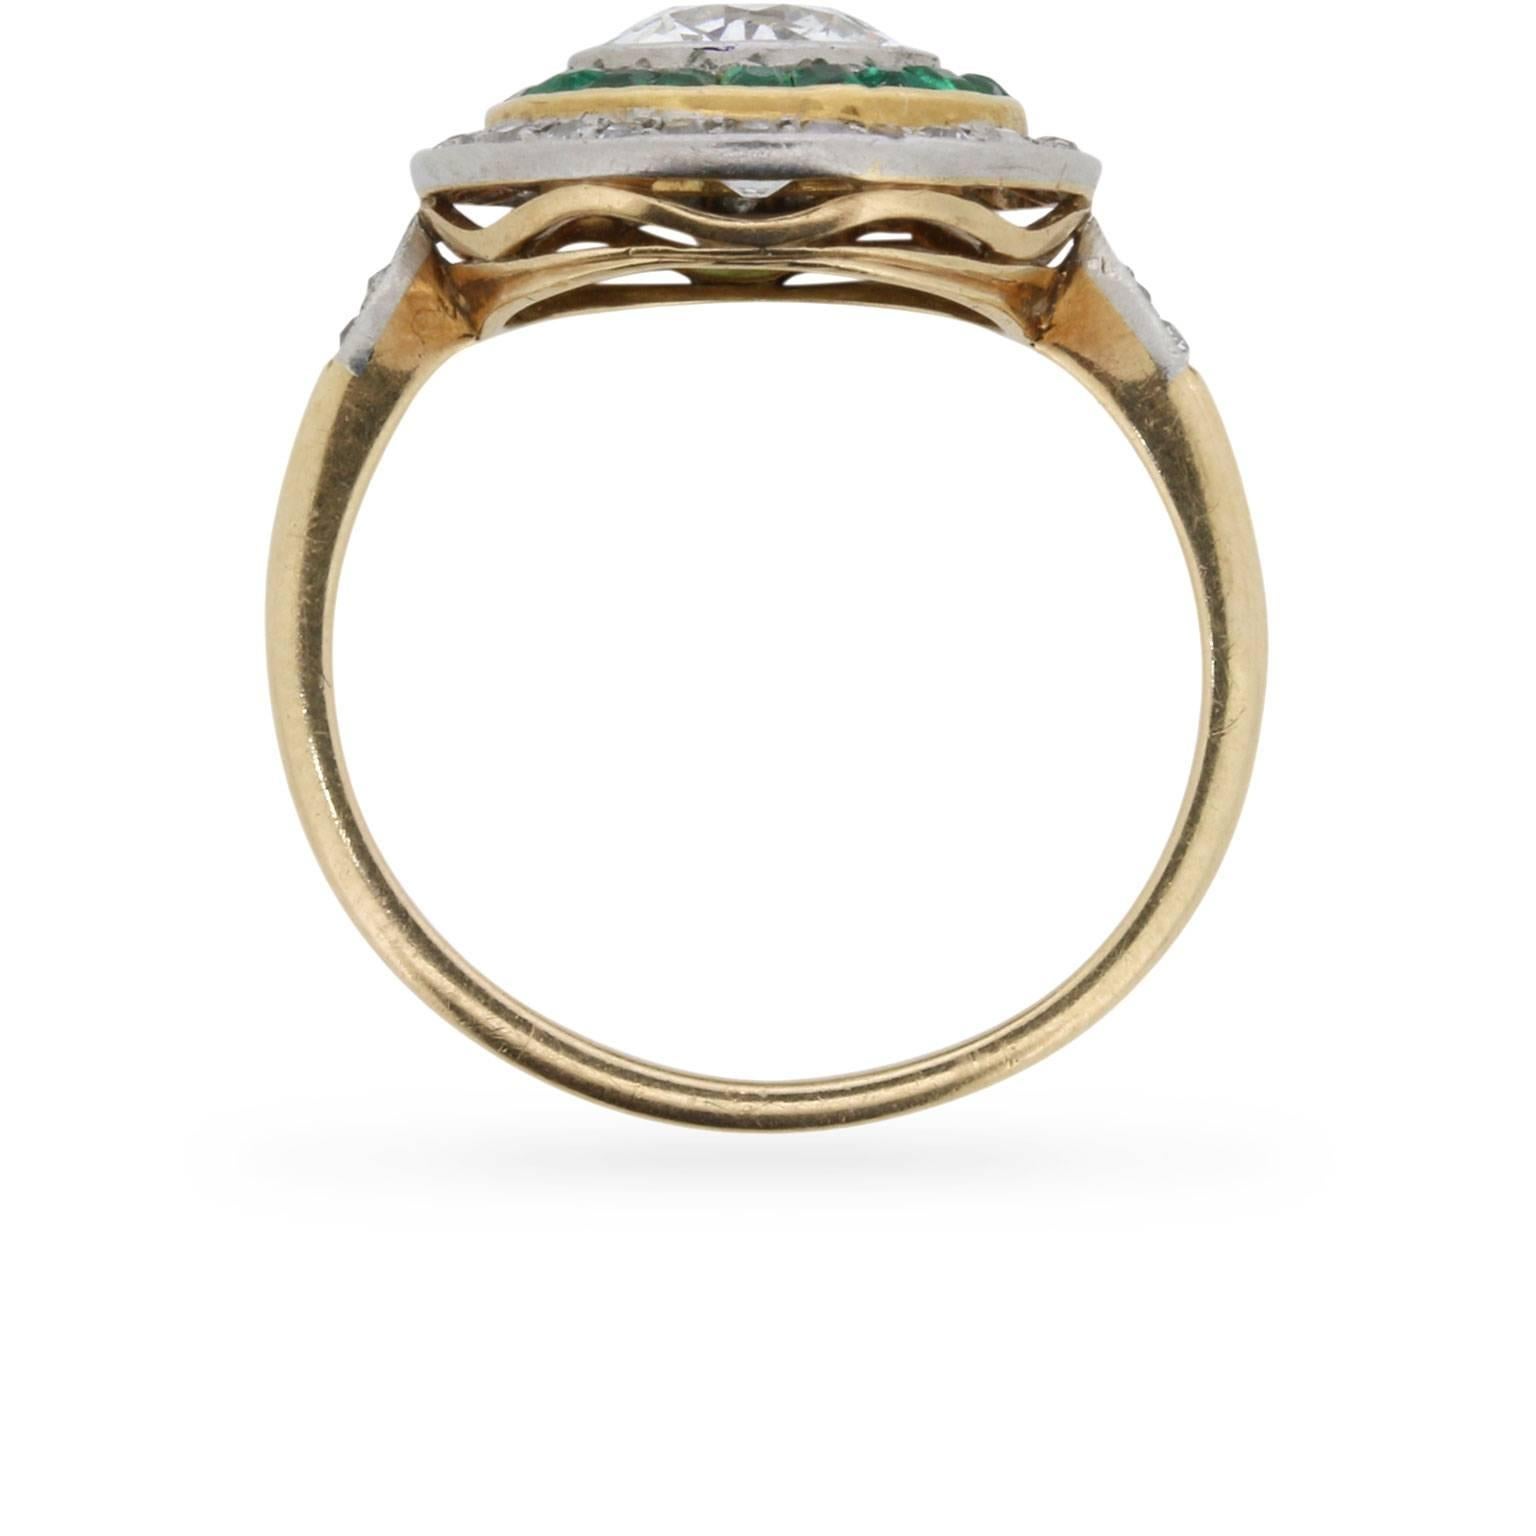 Handcrafted in 18 carat yellow gold and platinum during the 1890s, this wonderful example of a Victorian era target ring features an old cut diamond 'bullseye' with an approximate weight of 1.25 carats. The balance of the 'target' is comprised